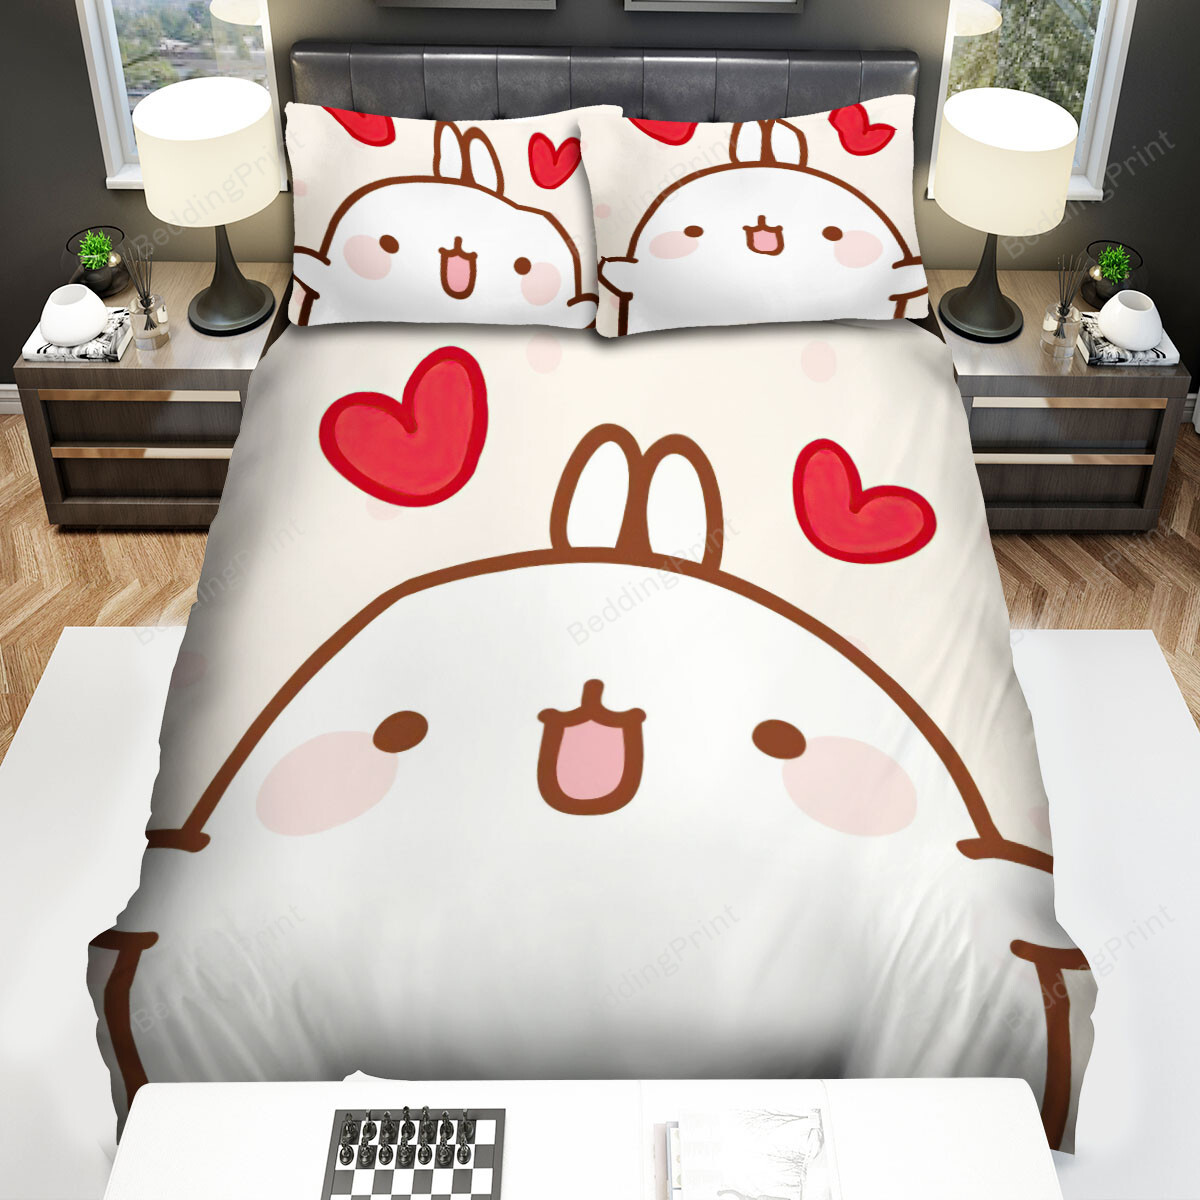 Molang So Cute Bed Sheets Spread Duvet Cover Bedding Sets